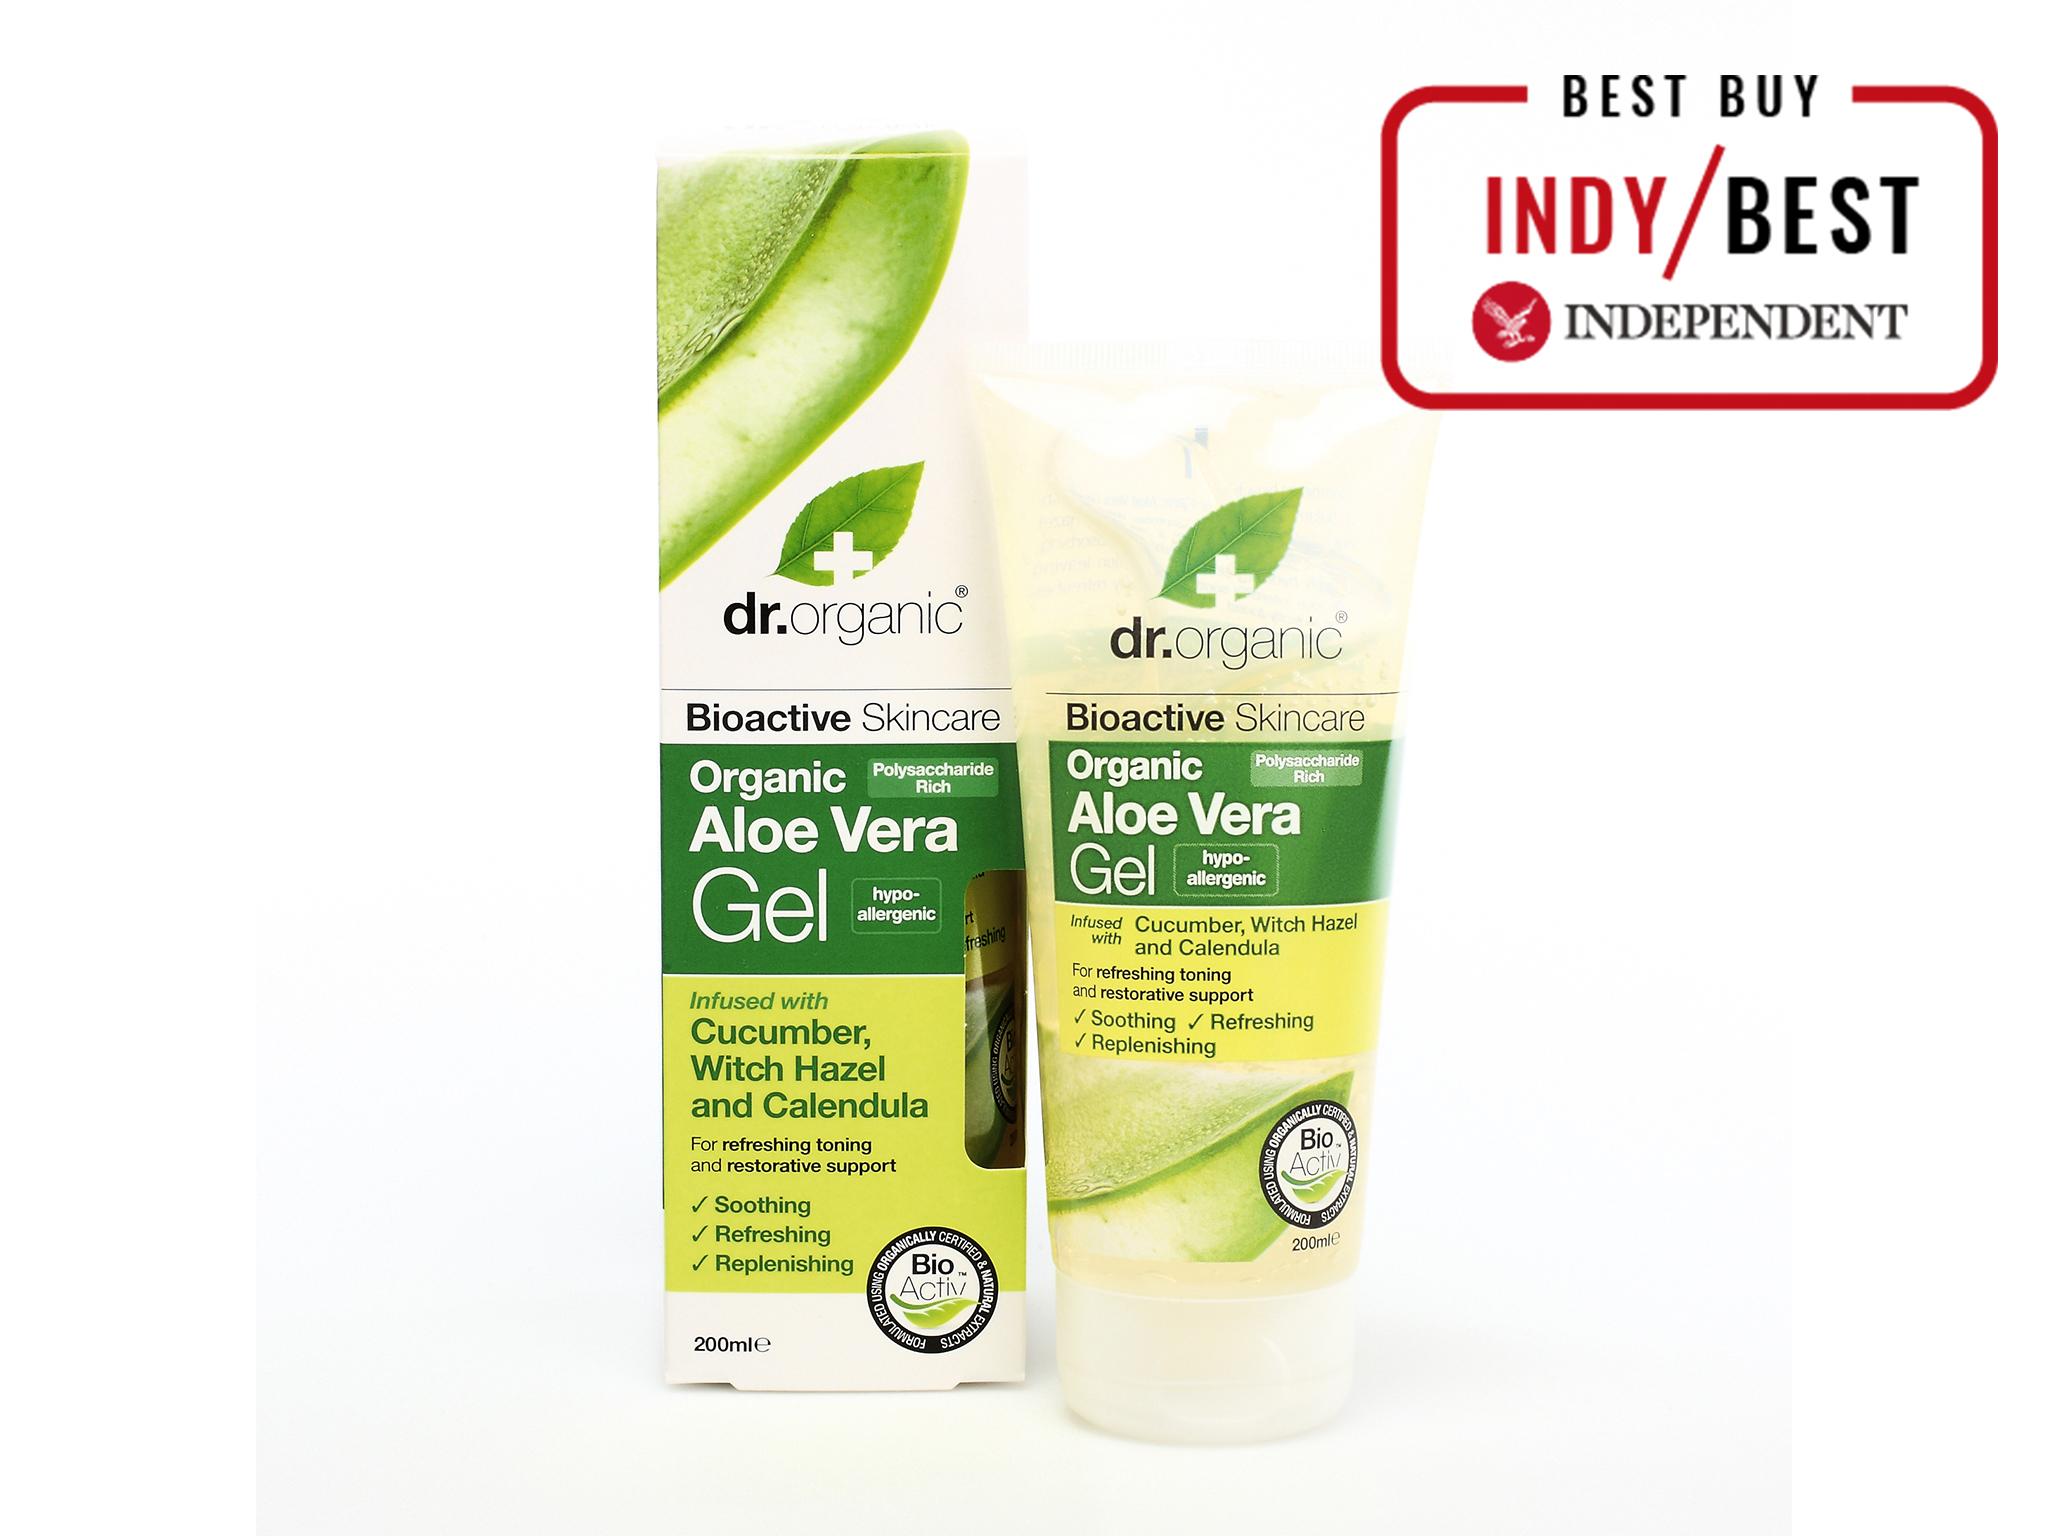 Aloe vera gels are surprisingly inexpensive, cooling, refreshing and redness-reducing